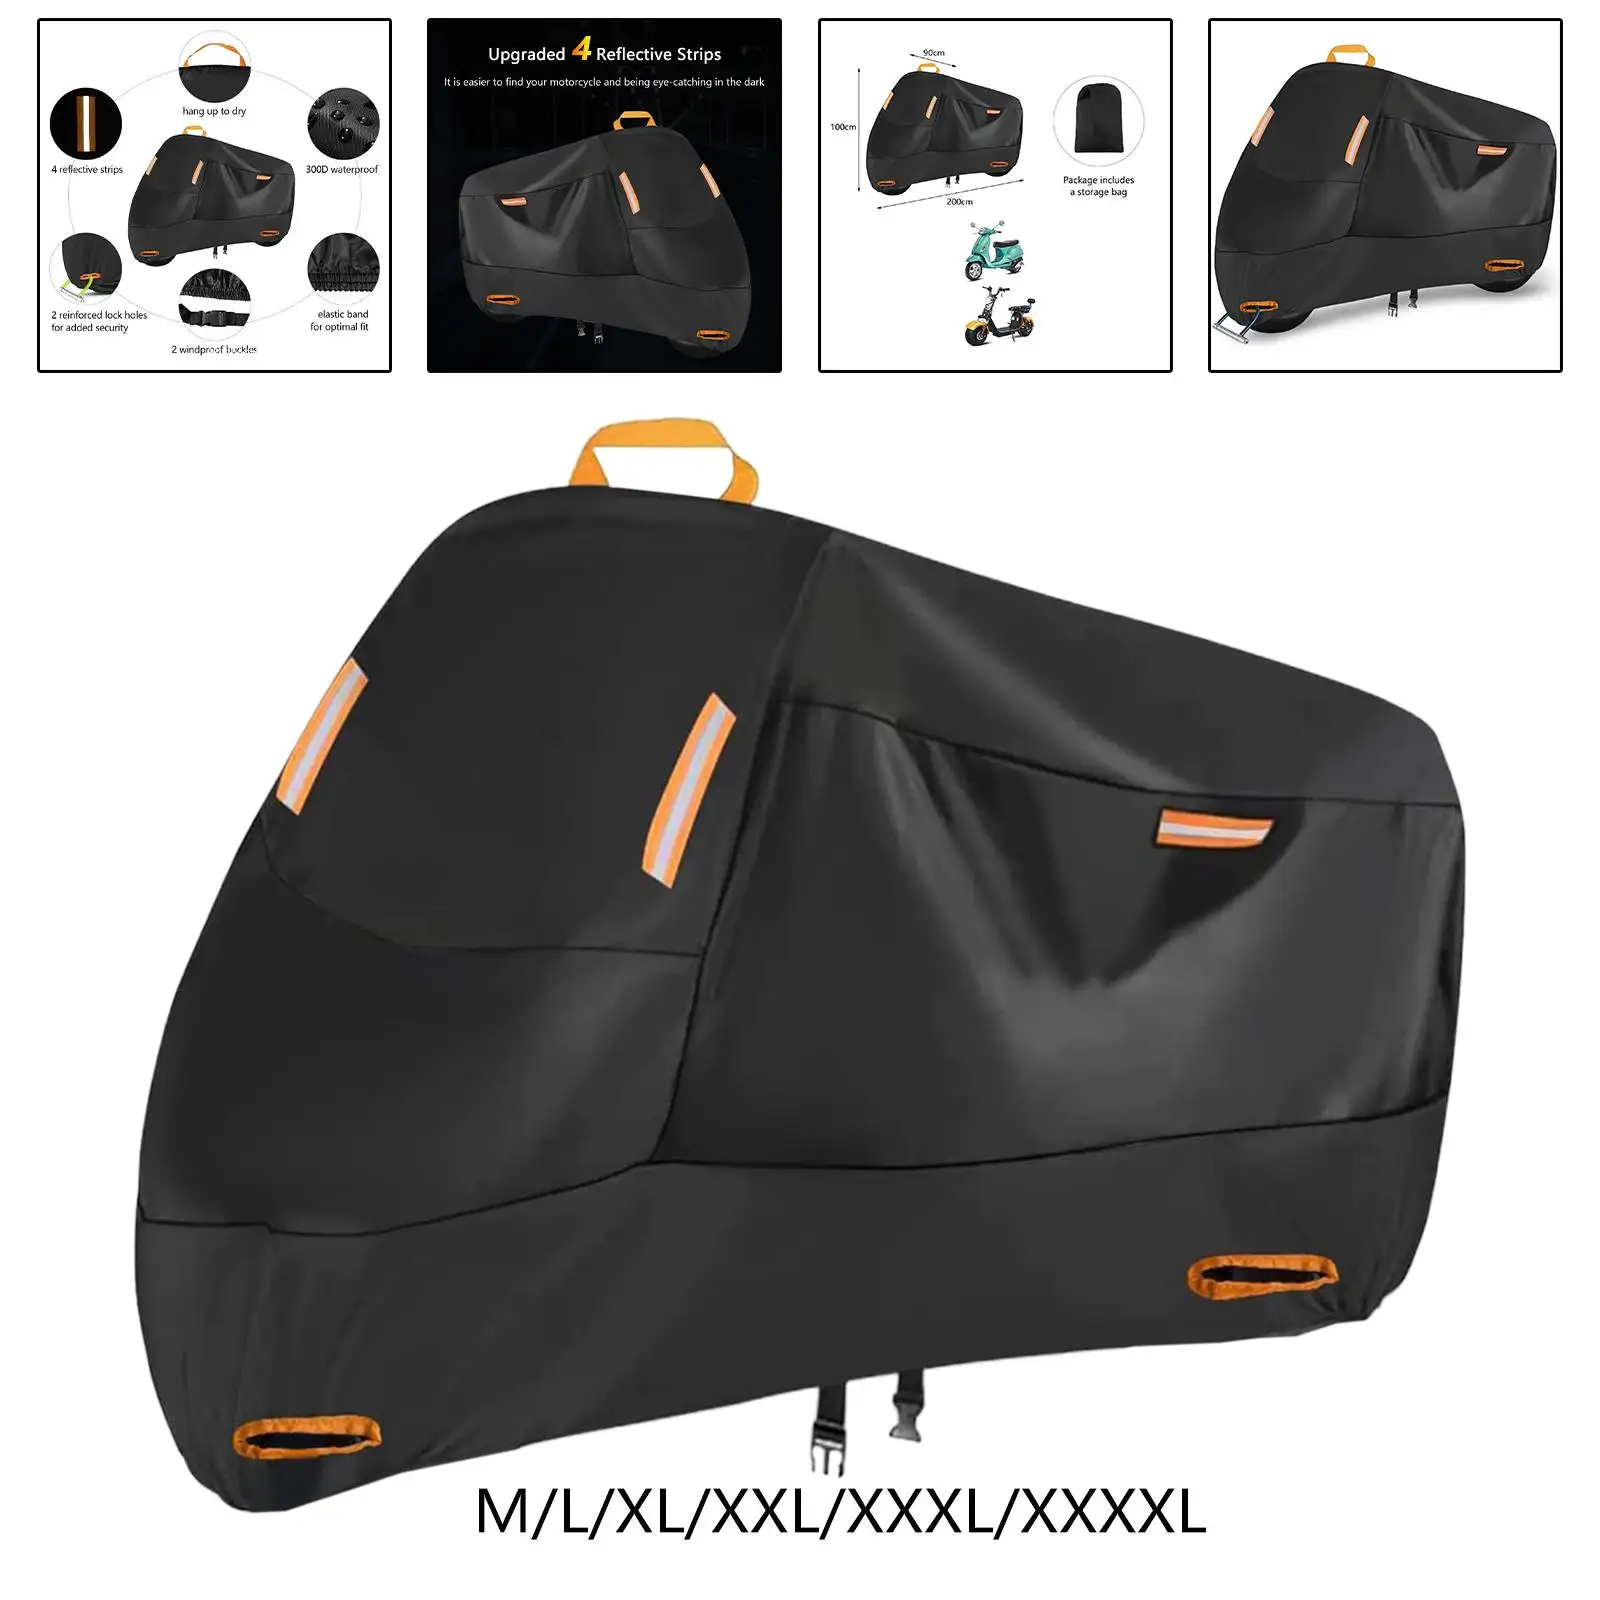 210D Motorcycle Cover Waterproof 2 Lock Holes 2 Windproof Buckles Scooter Cover Motorbike Rain Cover for Scooter All Season